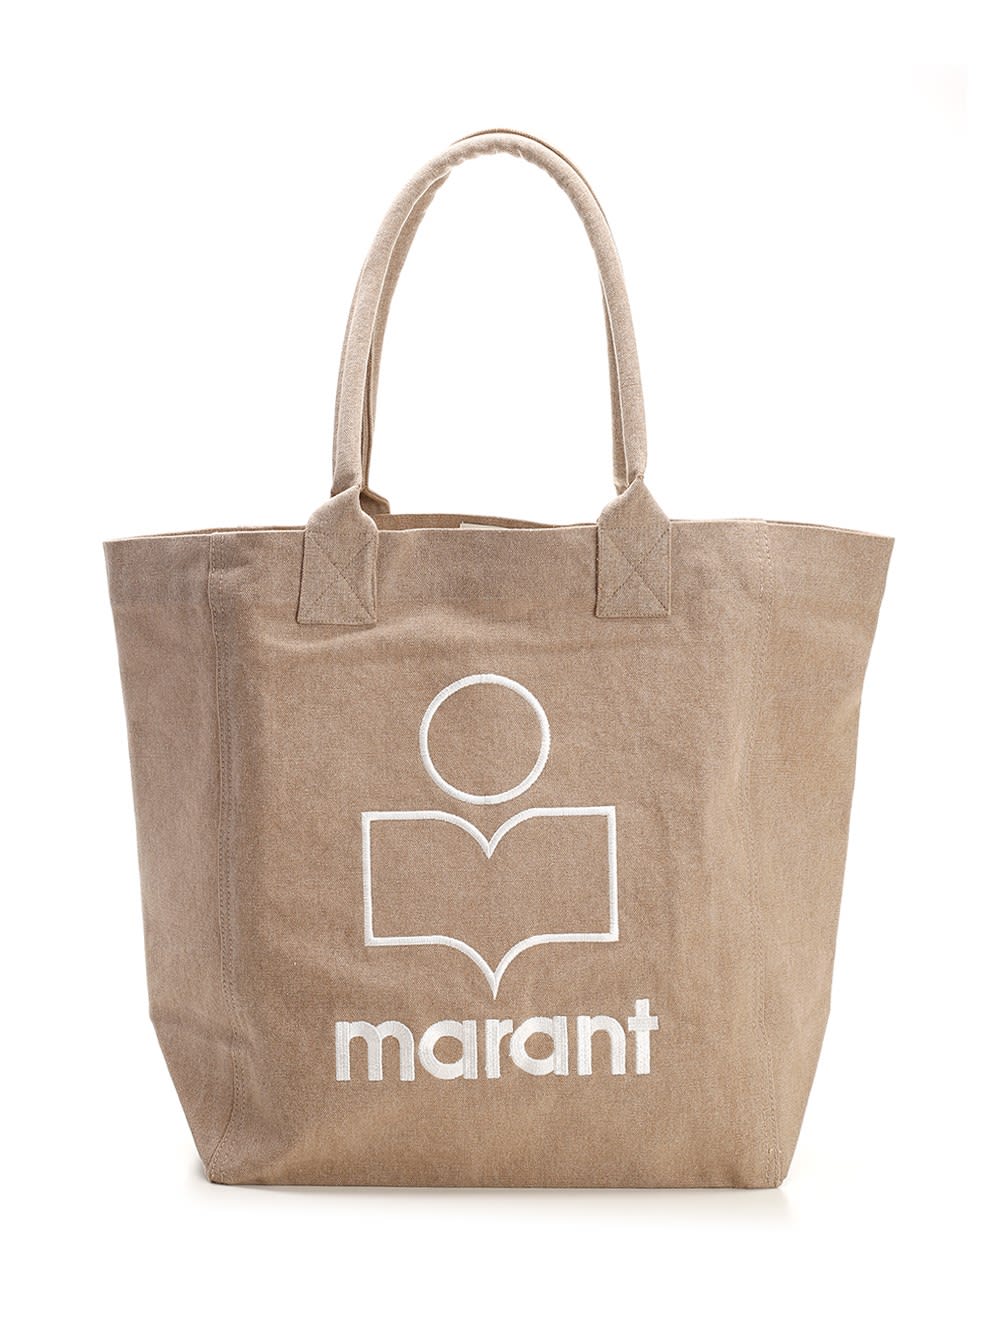 ISABEL MARANT YENKY TOTE BAG WITH LOGO